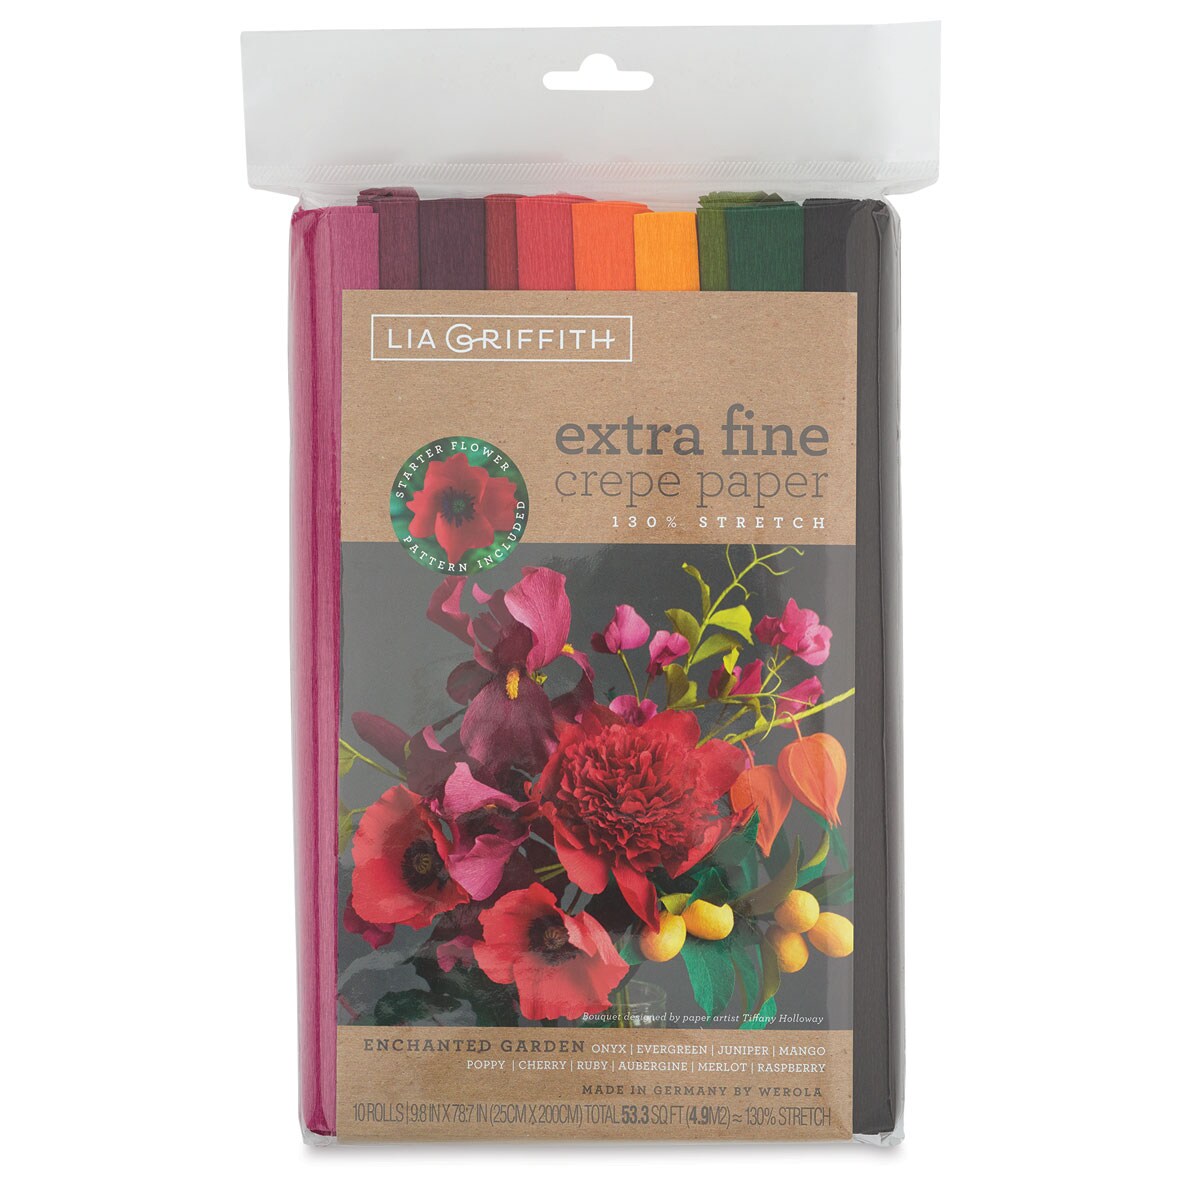 Lia Griffith Crepe Paper - Extra Fine, Enchanted Garden, Set of 10 Rolls